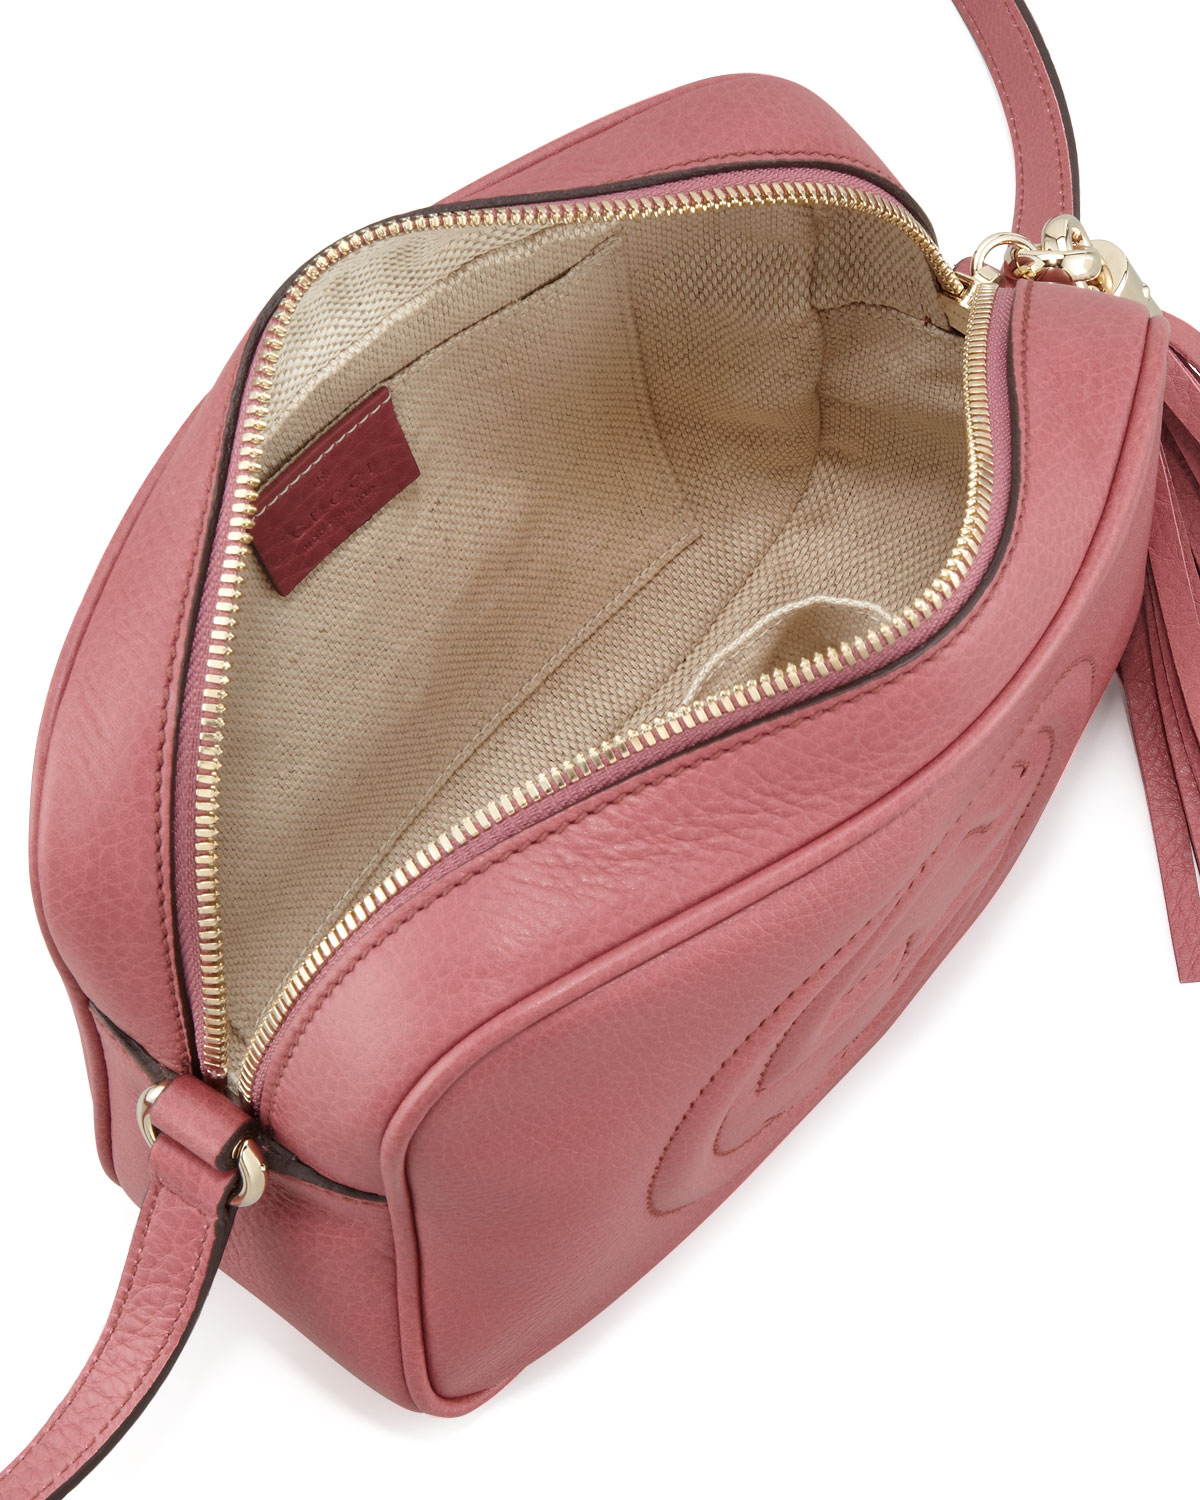 Lyst - Gucci Soho Leather Disco Bag in Pink